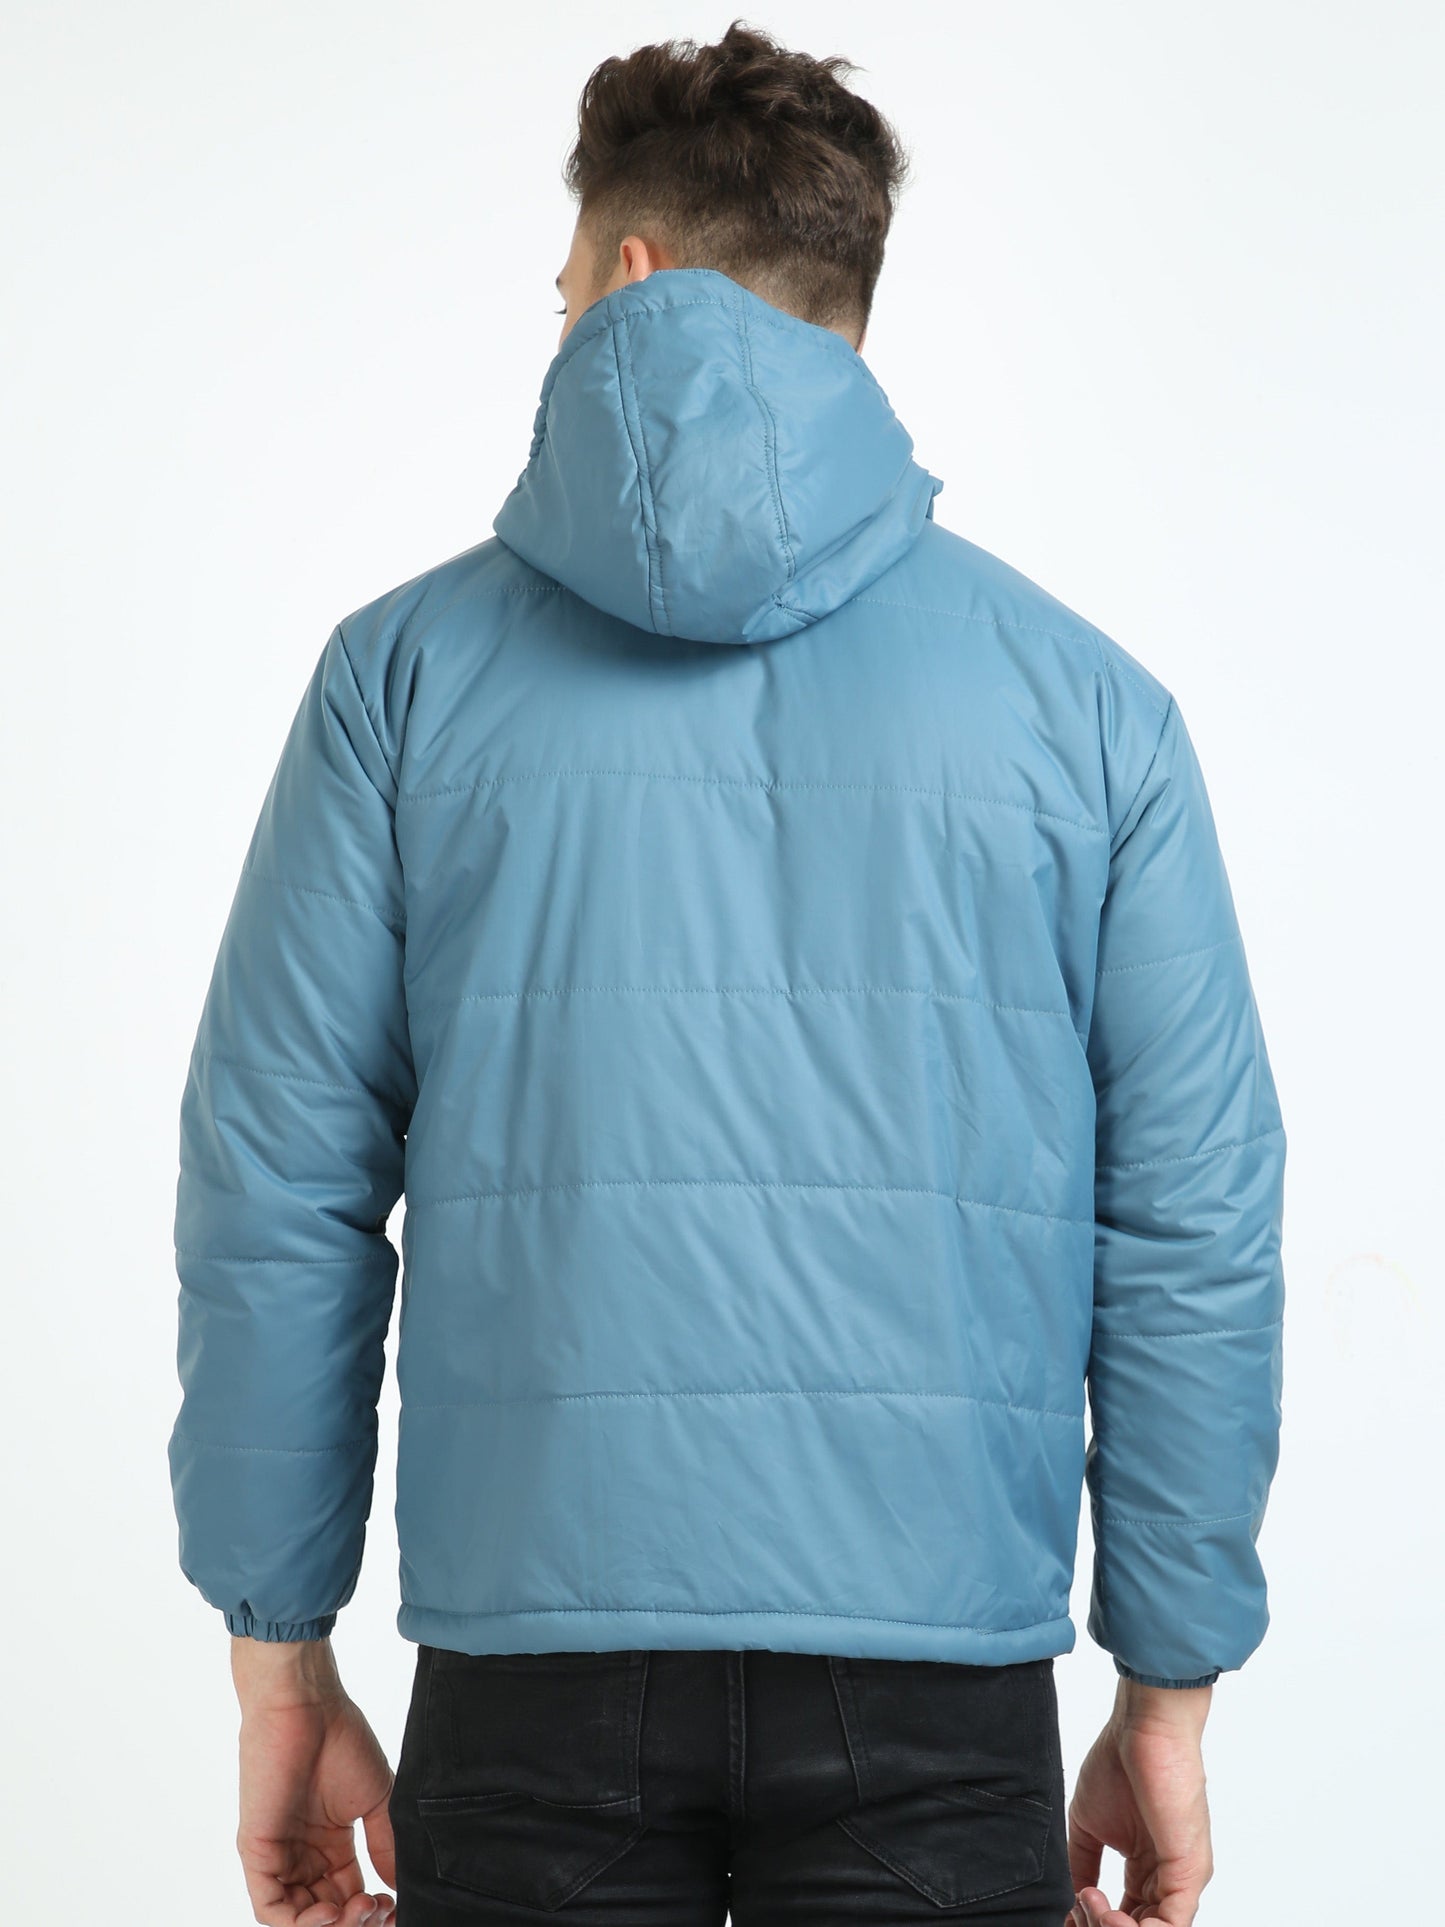 Air Force Blue Bomber With Hood Jacket